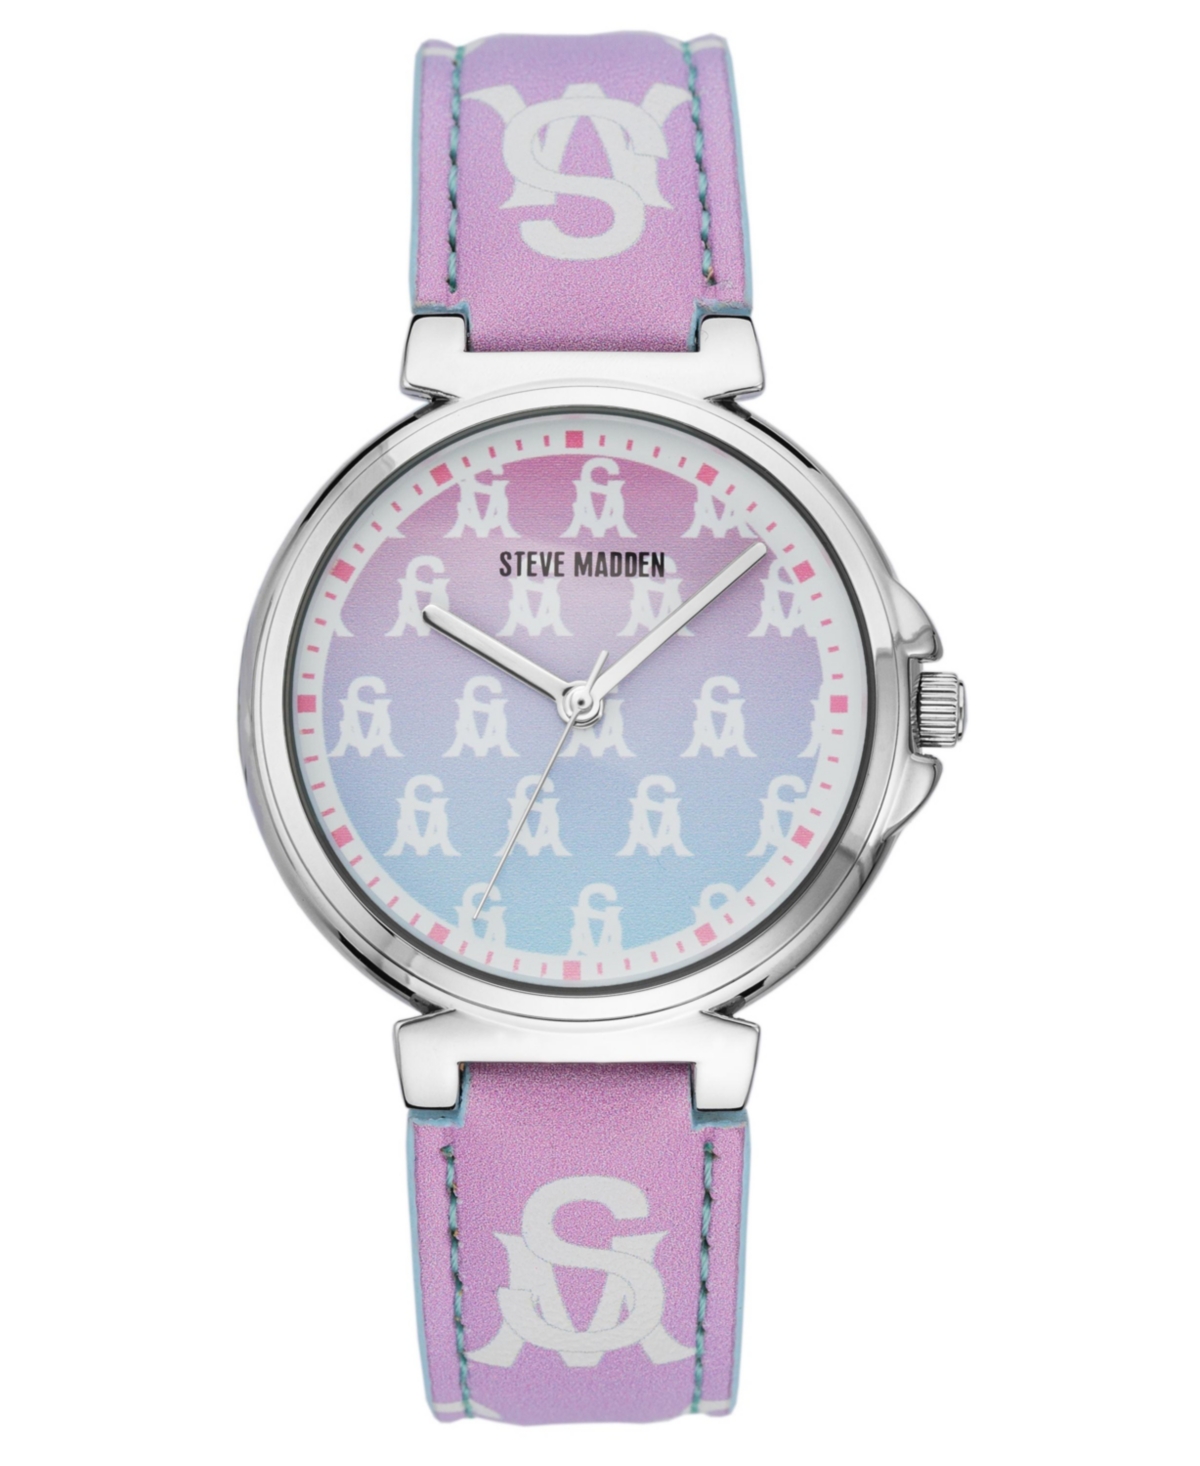 Women's Ombre Lavender and Pink Polyurethane Leather Strap with Steve Madden Logo and Stitching Watch, 36mm - Pink, White